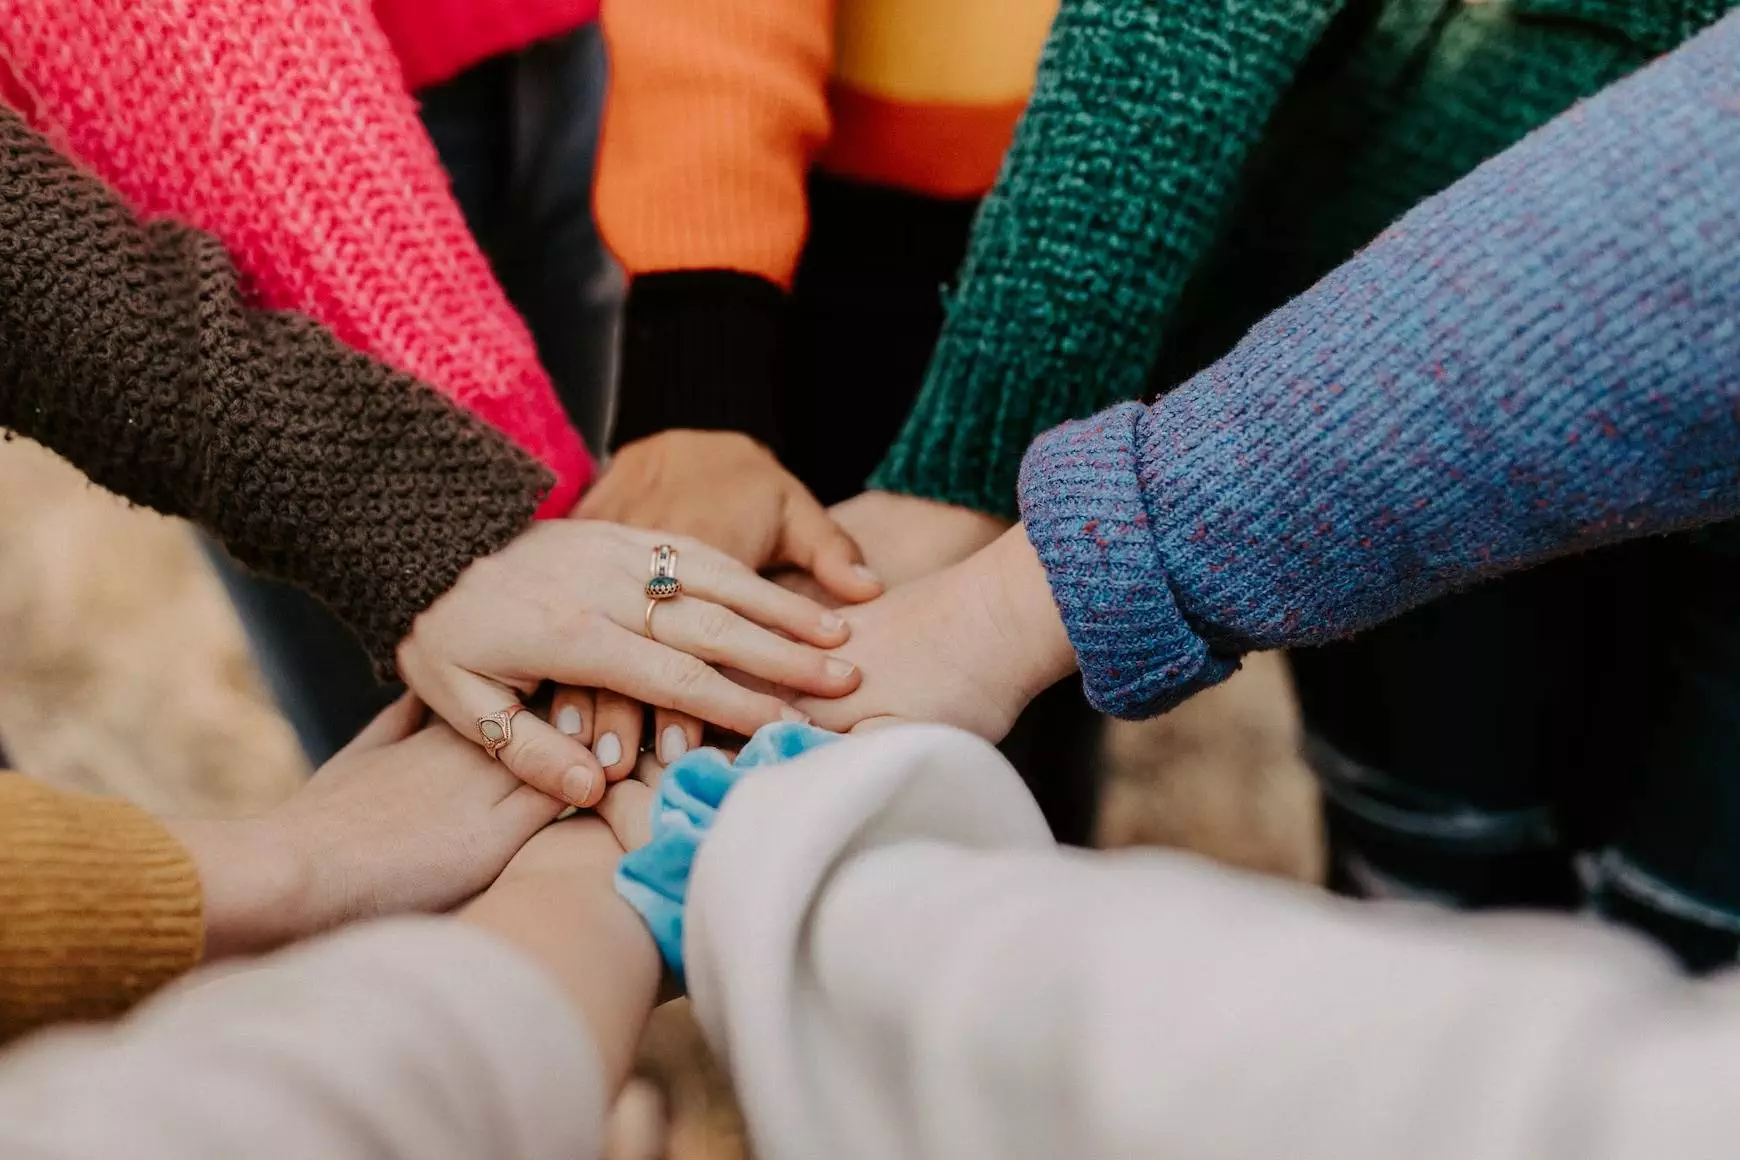 A close-up of several hands holding each other. The hands are all wearing rings and the background appears to be a dark, blurry orange sweater. There is one person in the center with their arm visible, while the others have their arms hidden behind them.